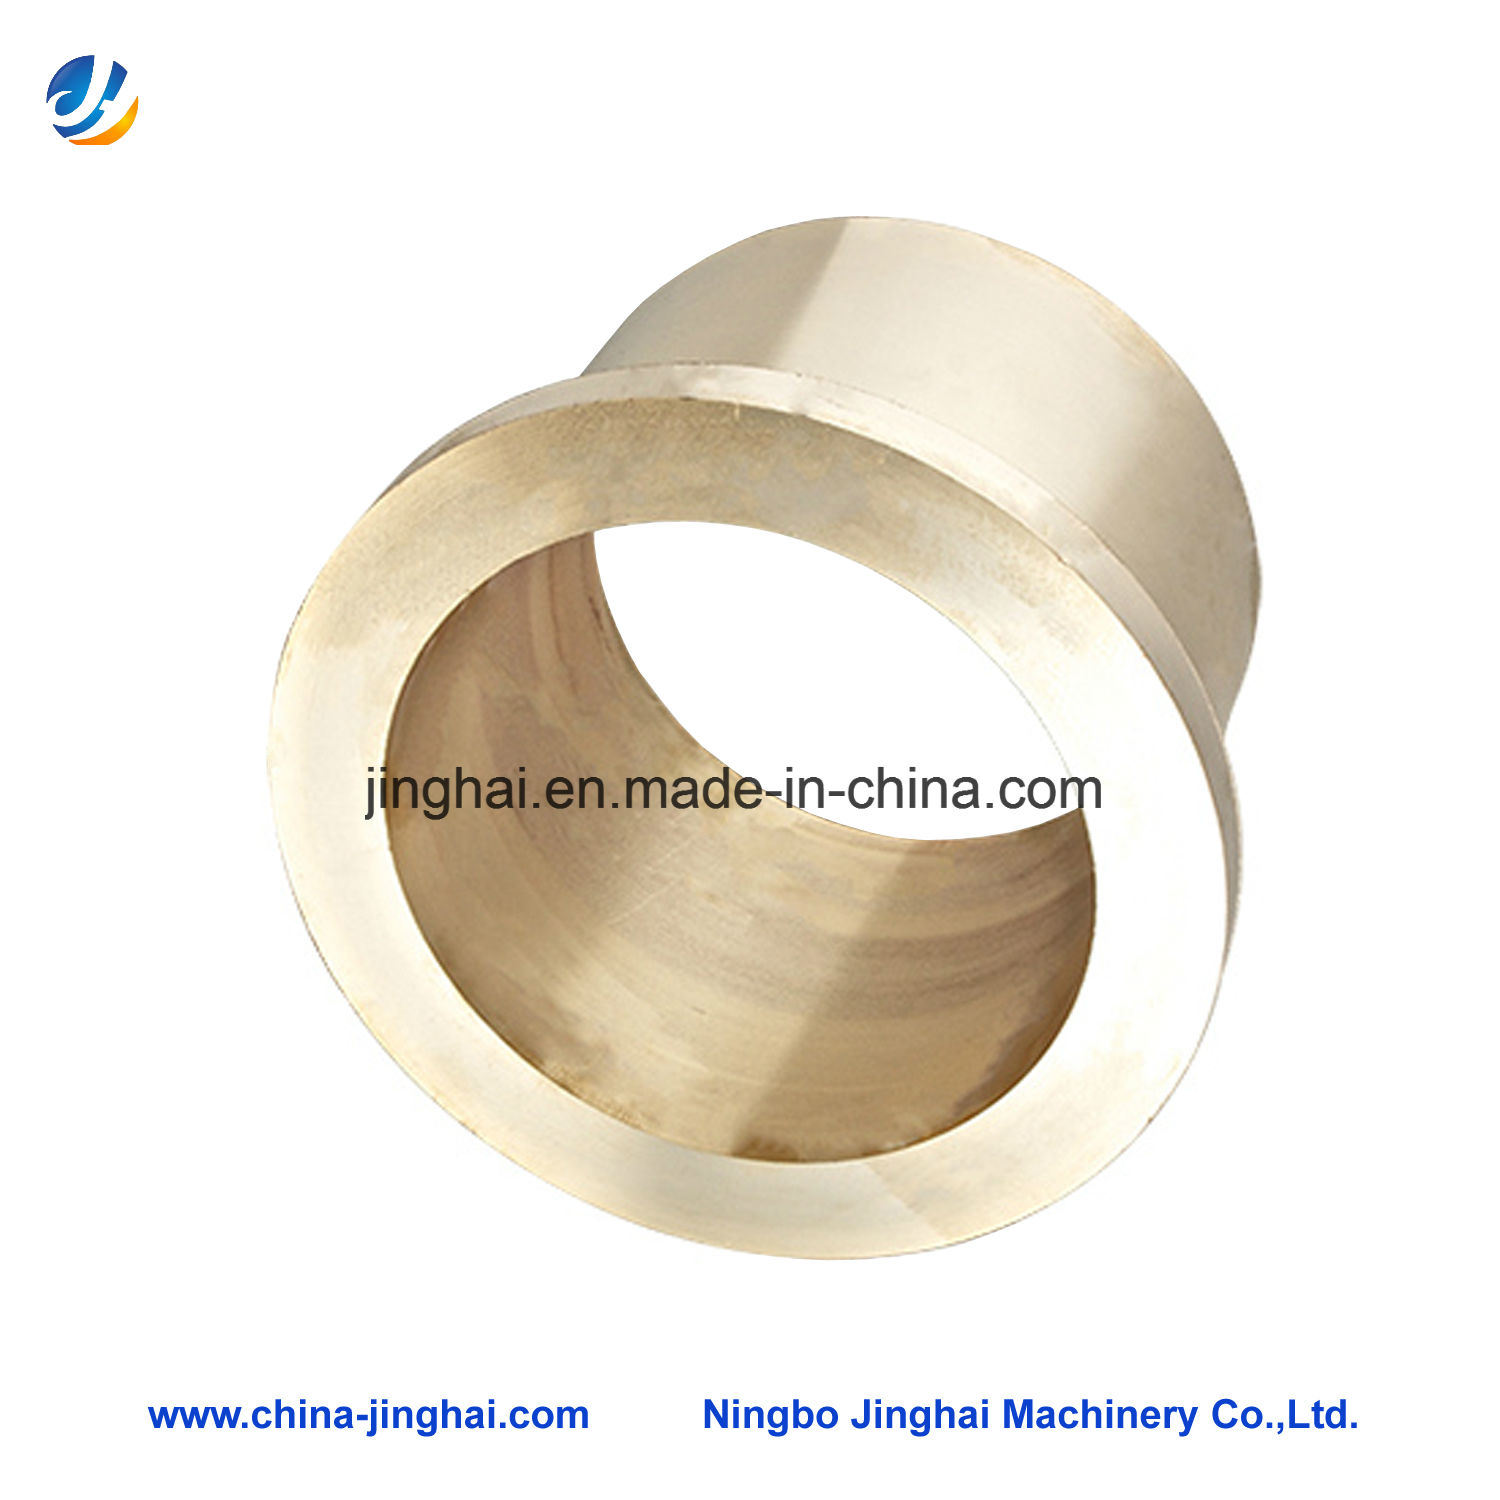 Customized CNC Machine Copper Bushing of Cooling System